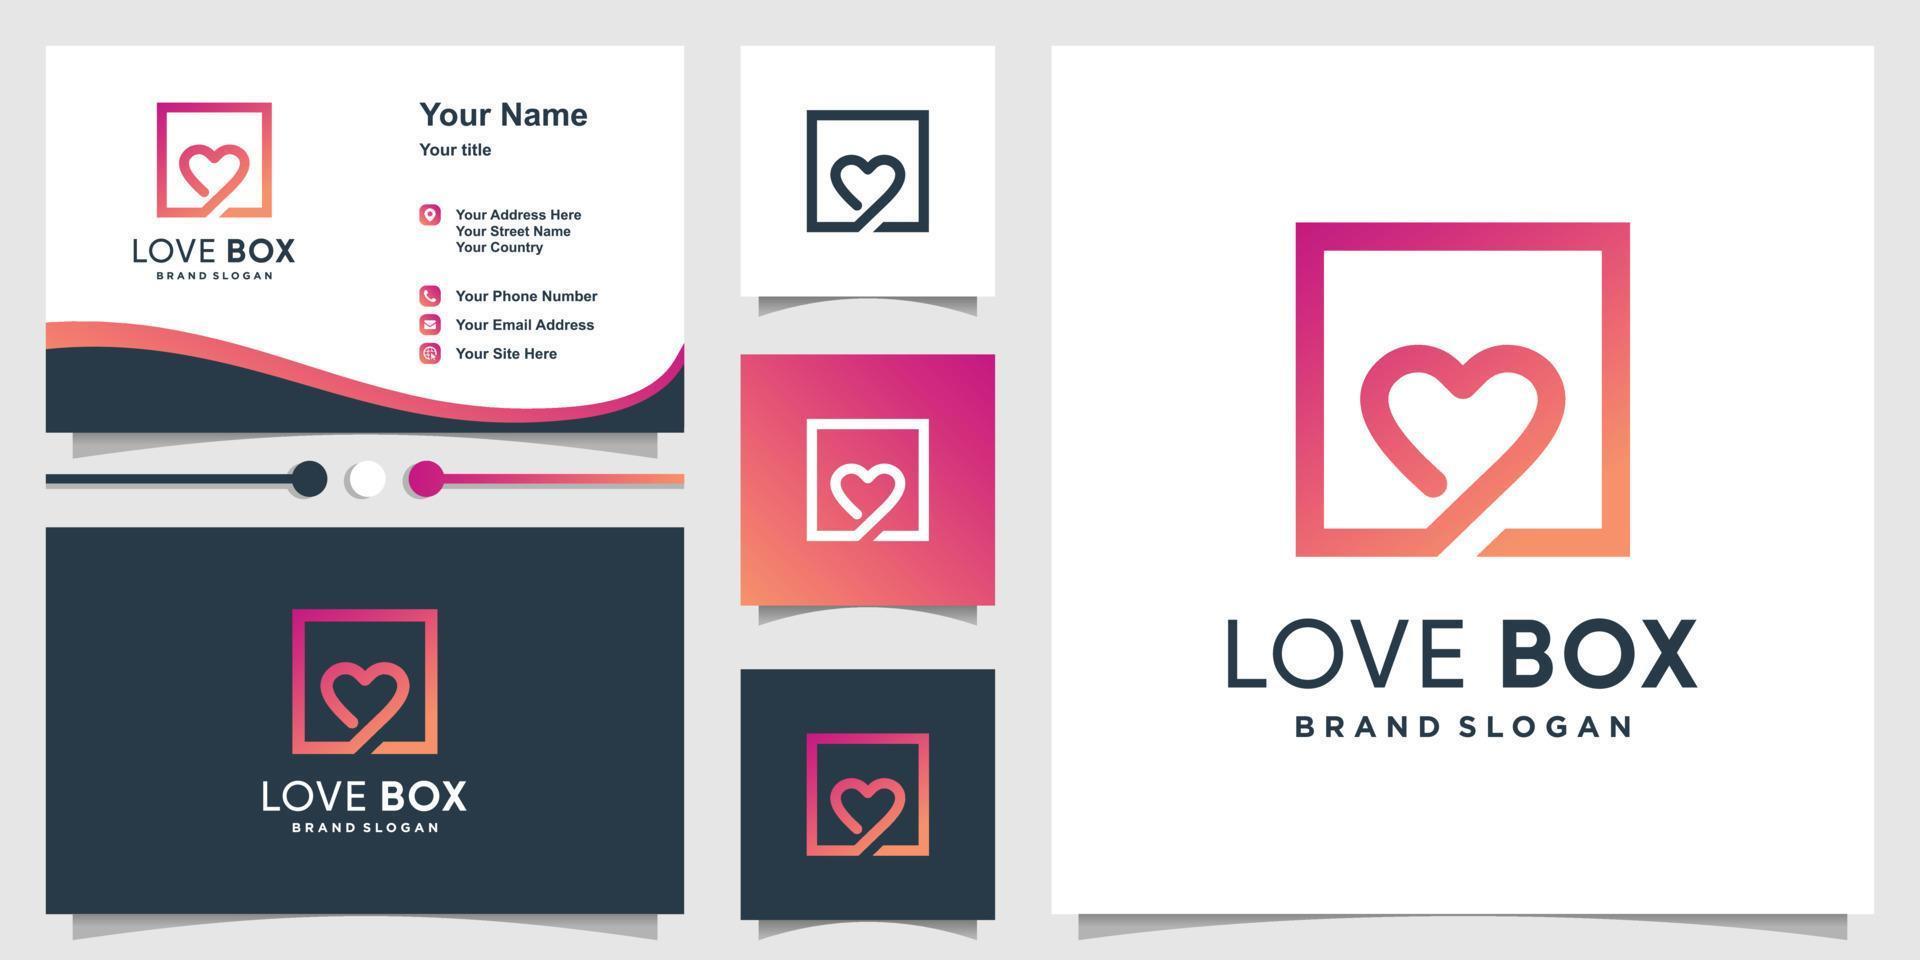 https://static.vecteezy.com/system/resources/previews/006/797/591/non_2x/love-box-logo-with-modern-style-and-business-card-design-premium-vector.jpg